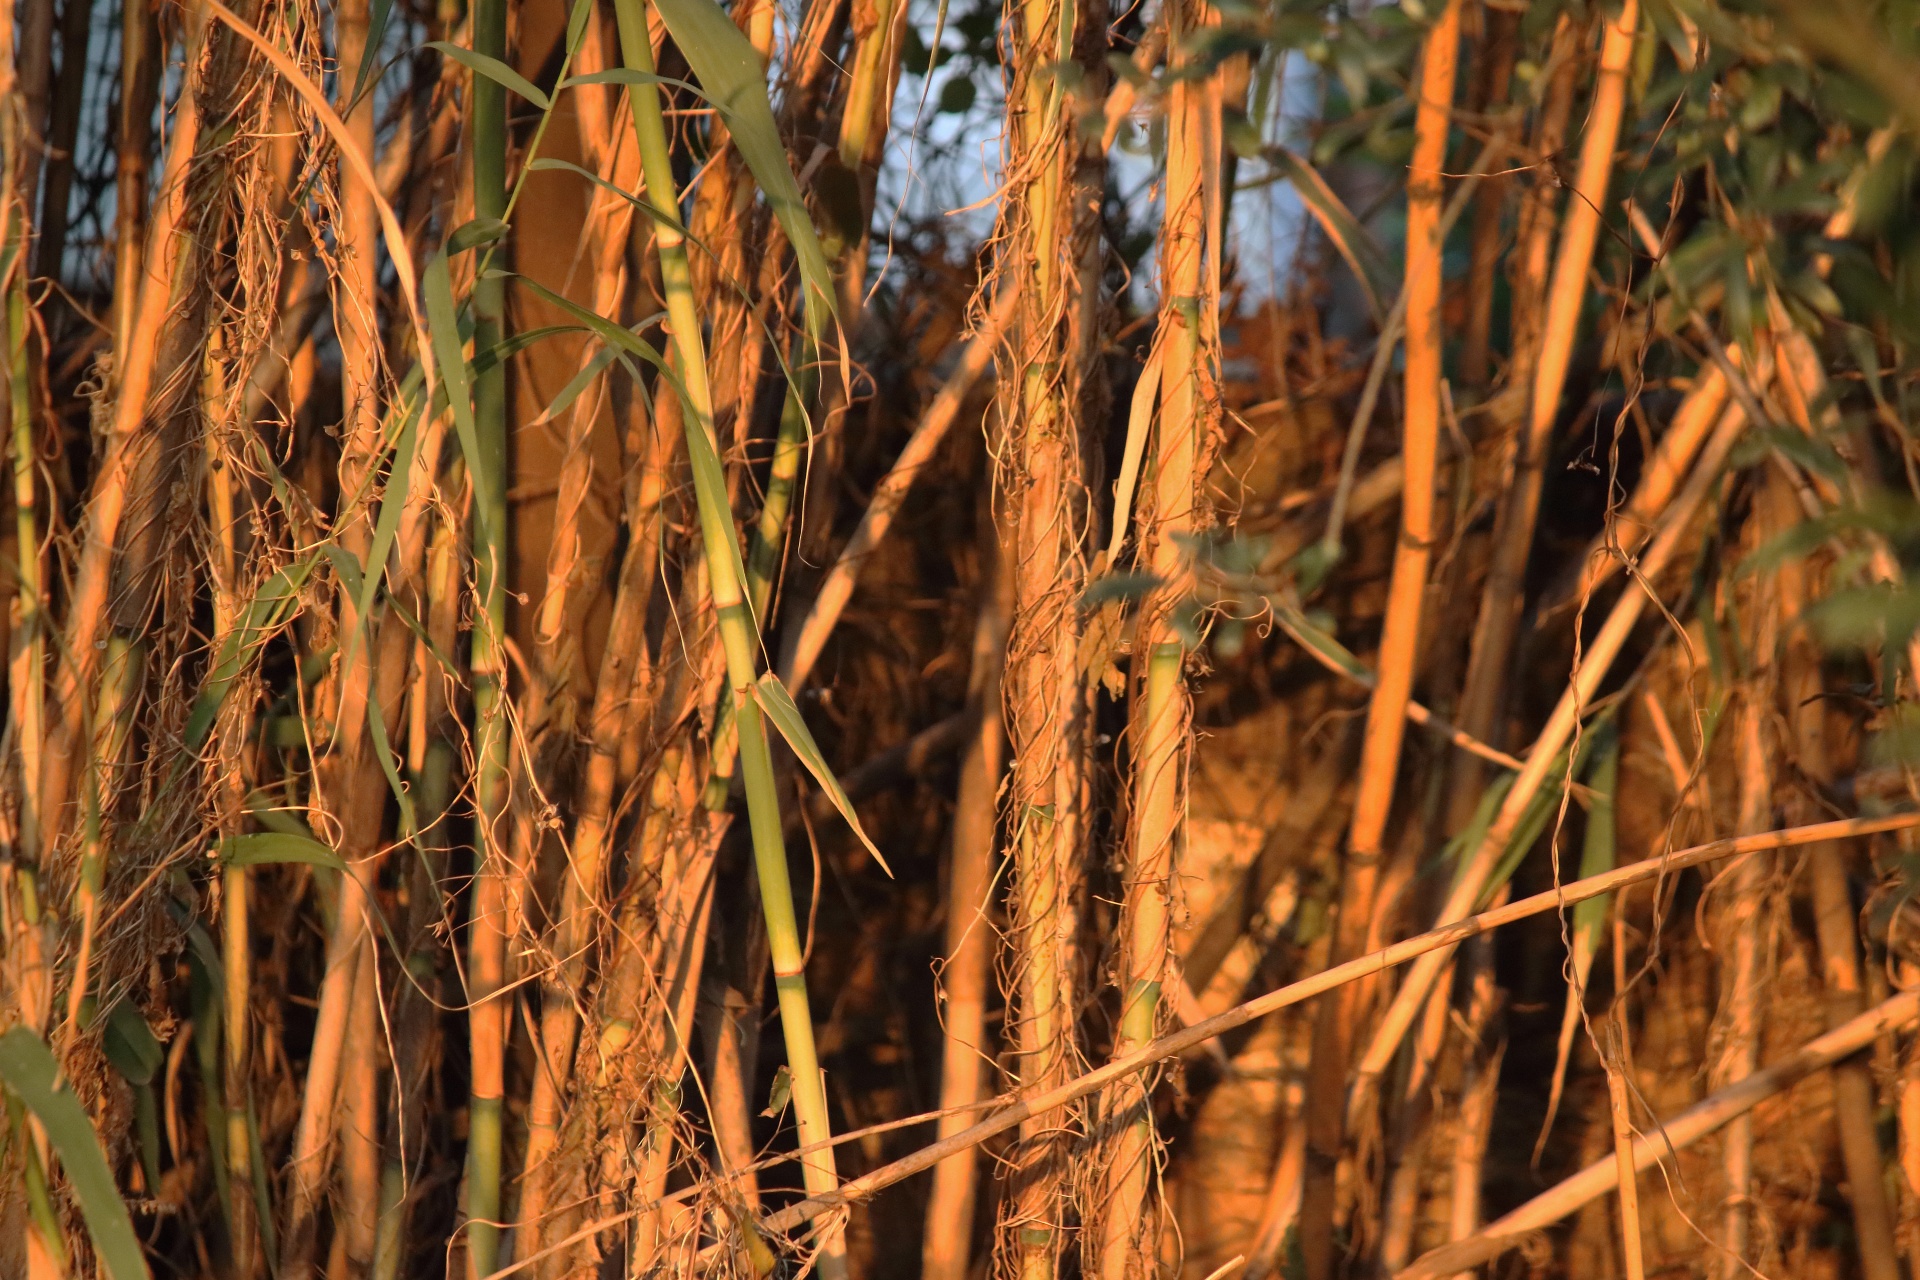 Late Afternoon Sunlight On Reeds